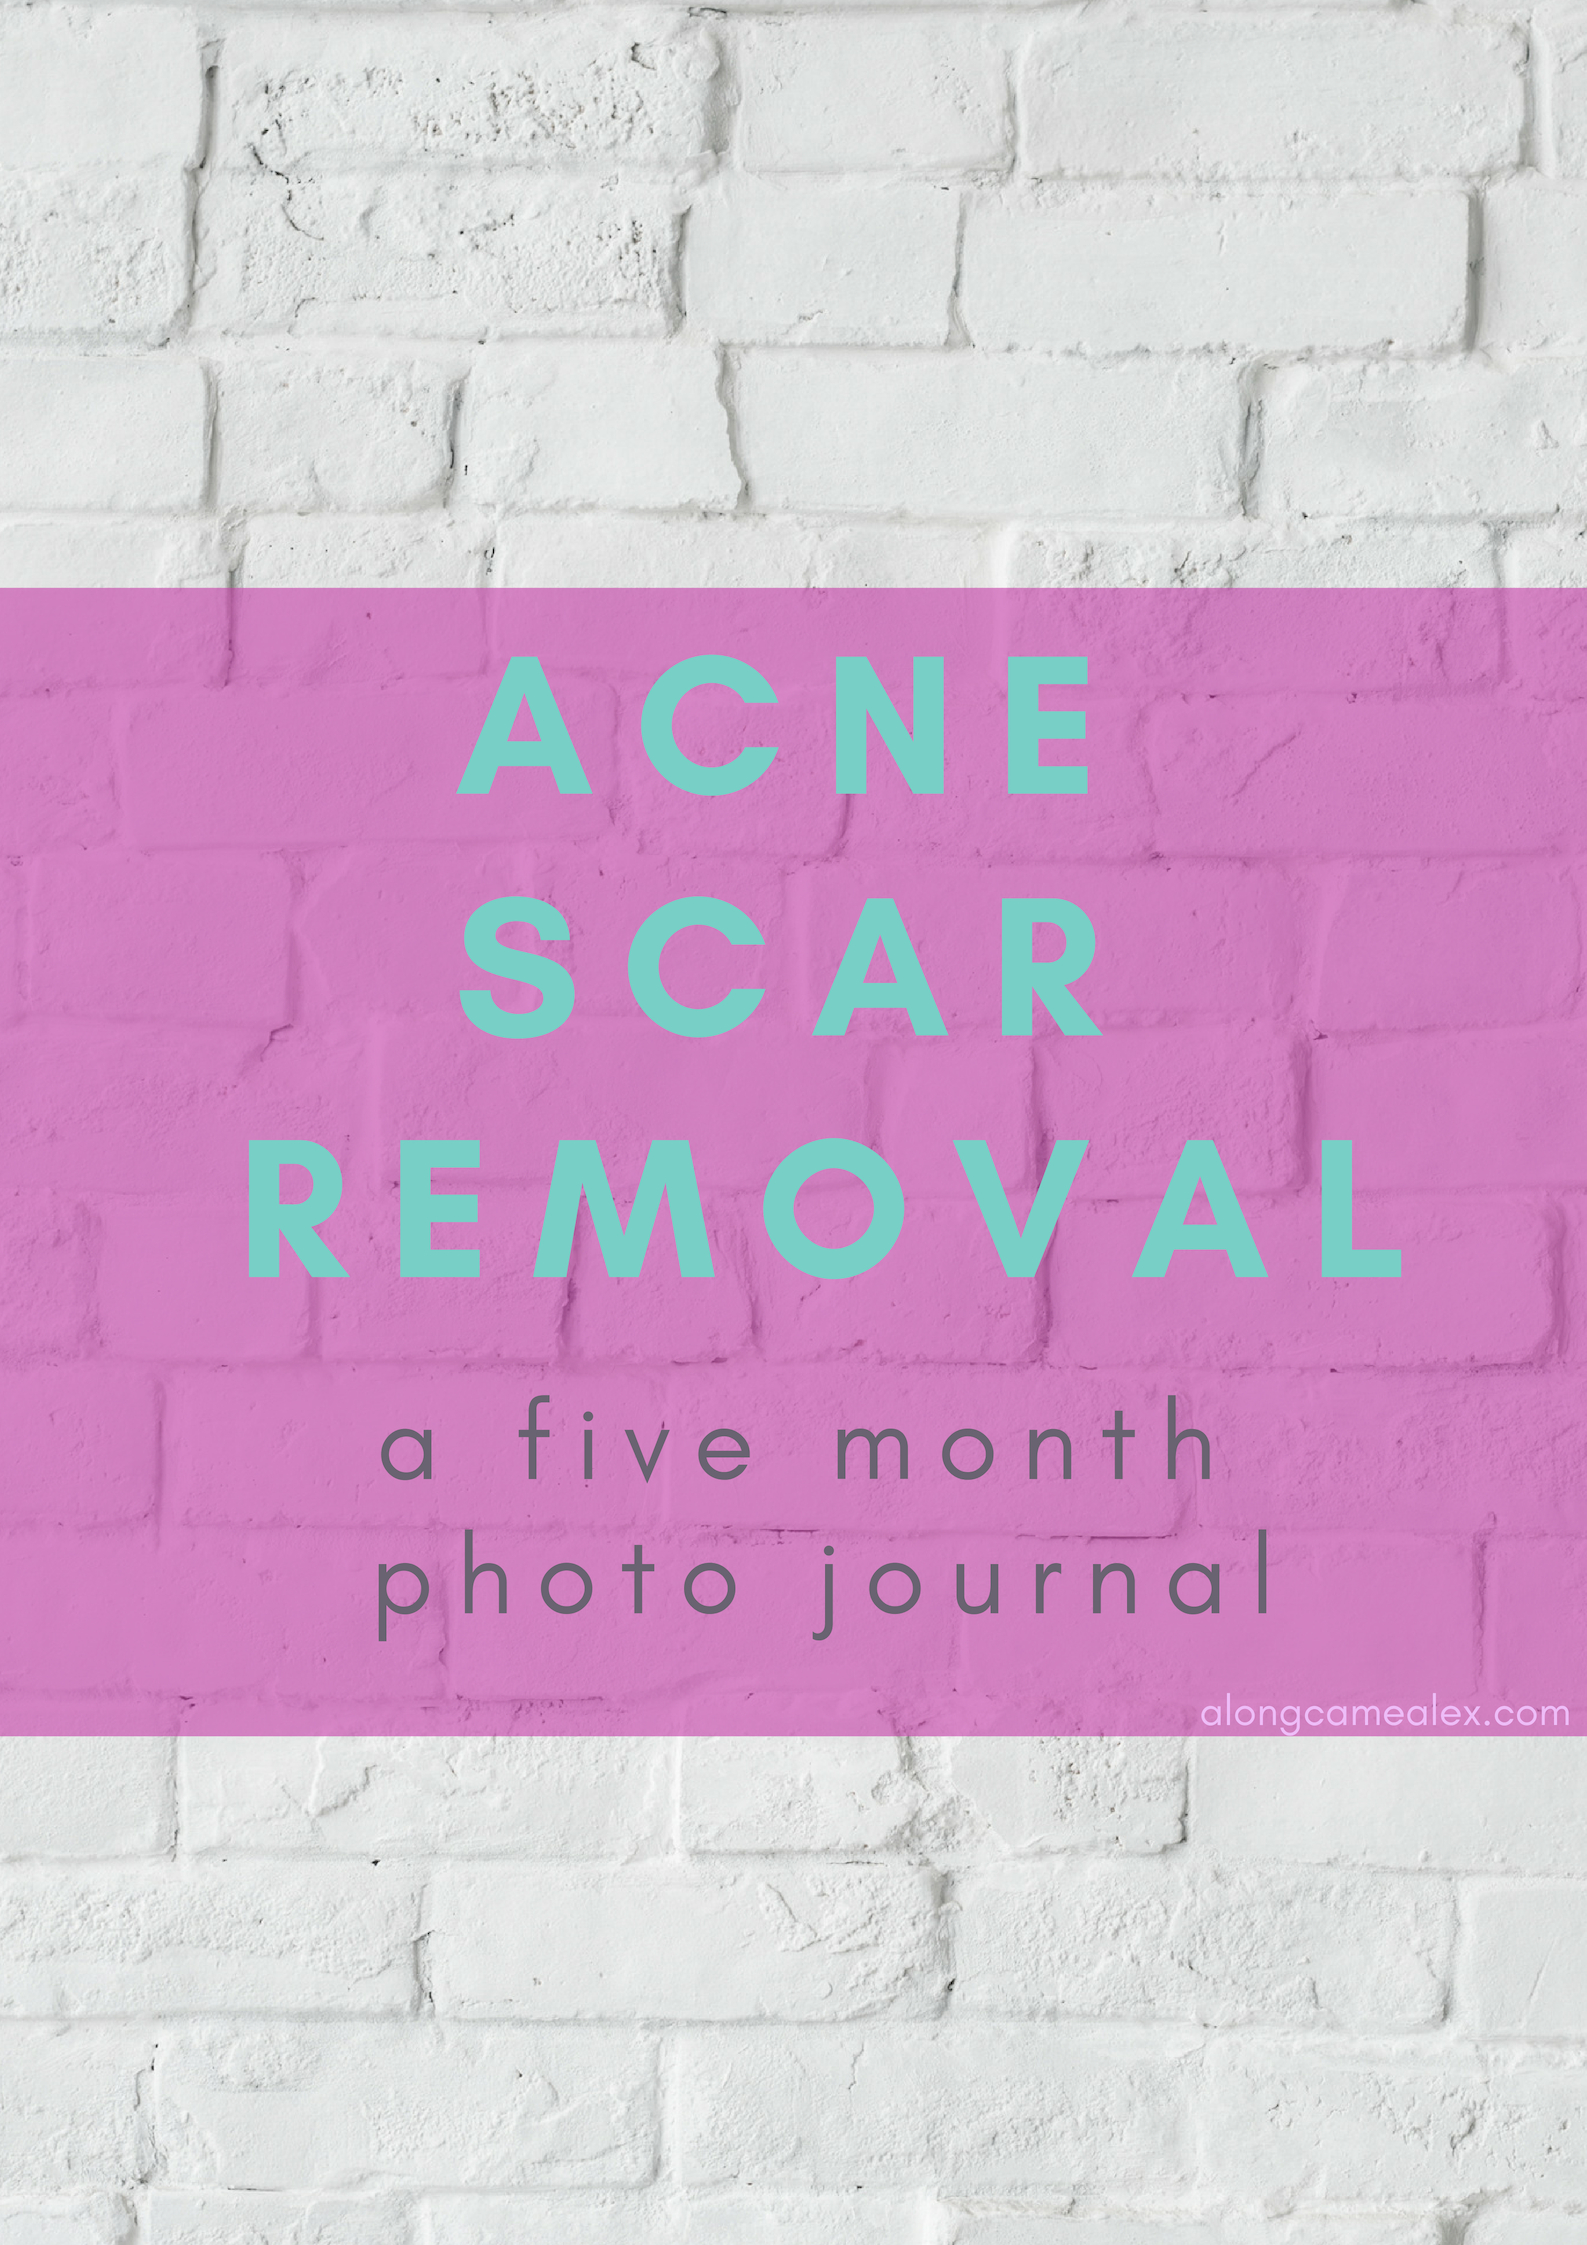 Acne Scar Removal Journey: A 5 month photo journal